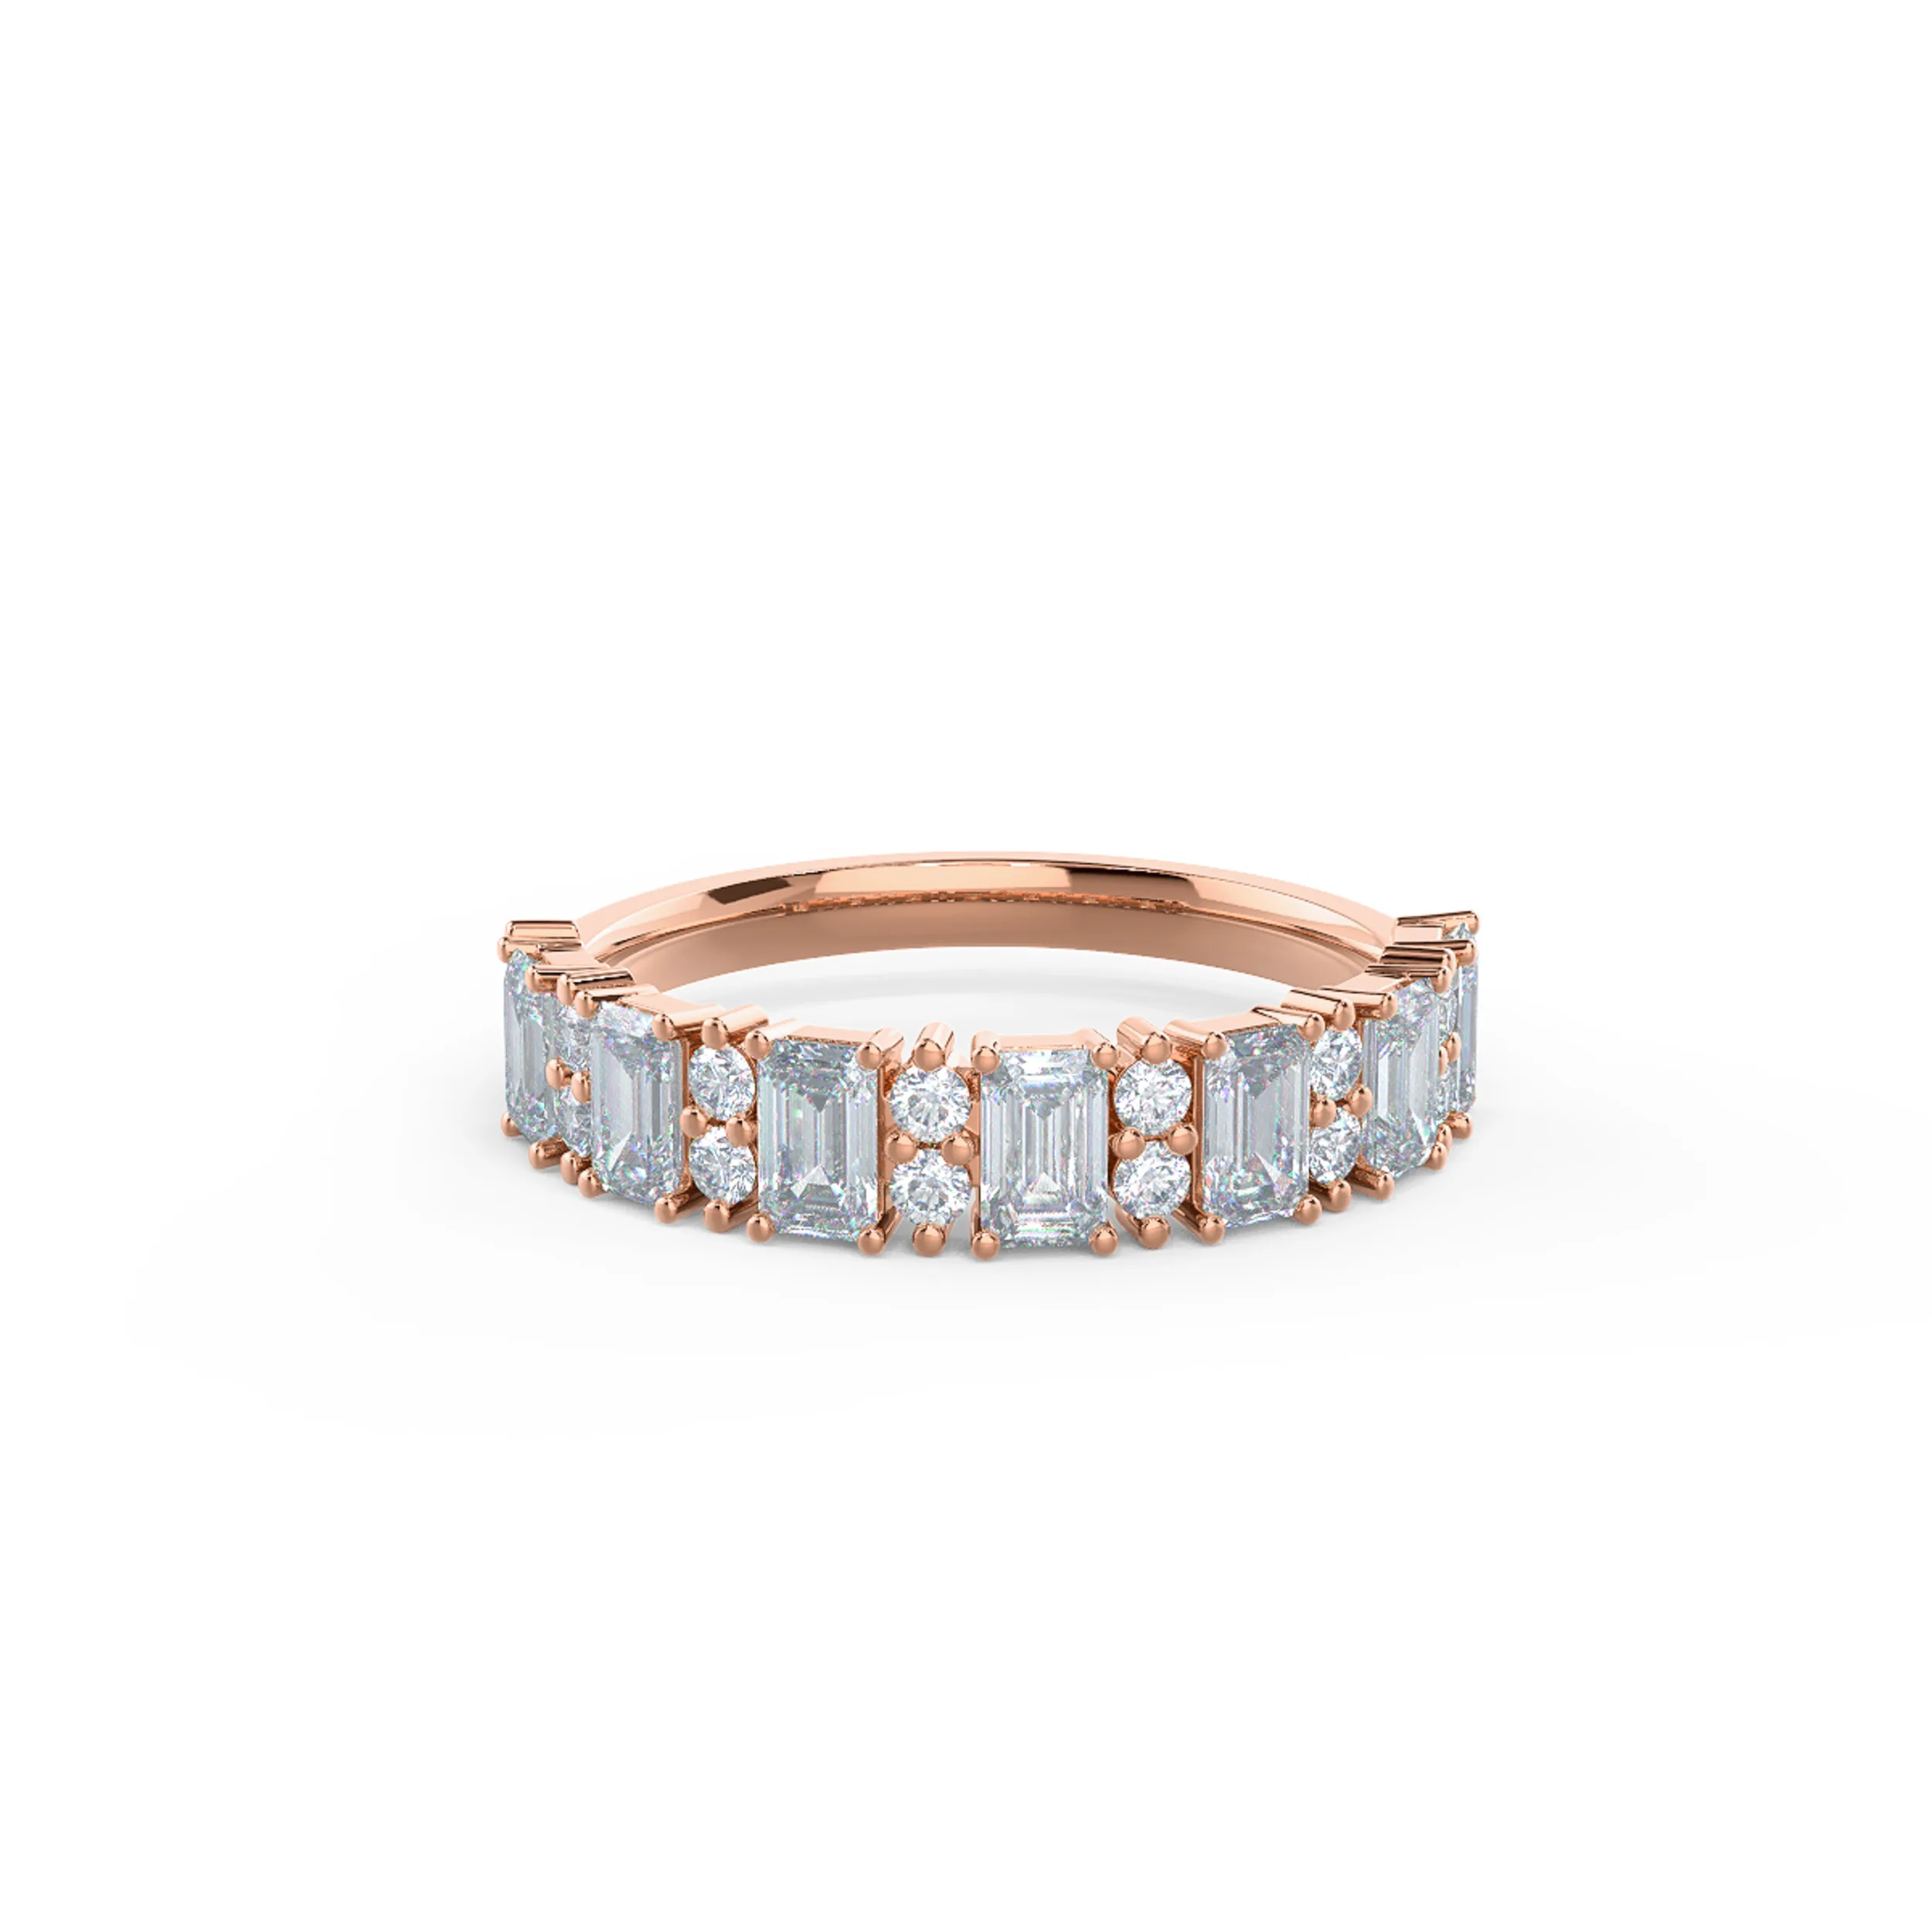 1.6 ct Diamonds set in 14k Rose Gold Emerald and Round Half Band (Main View)